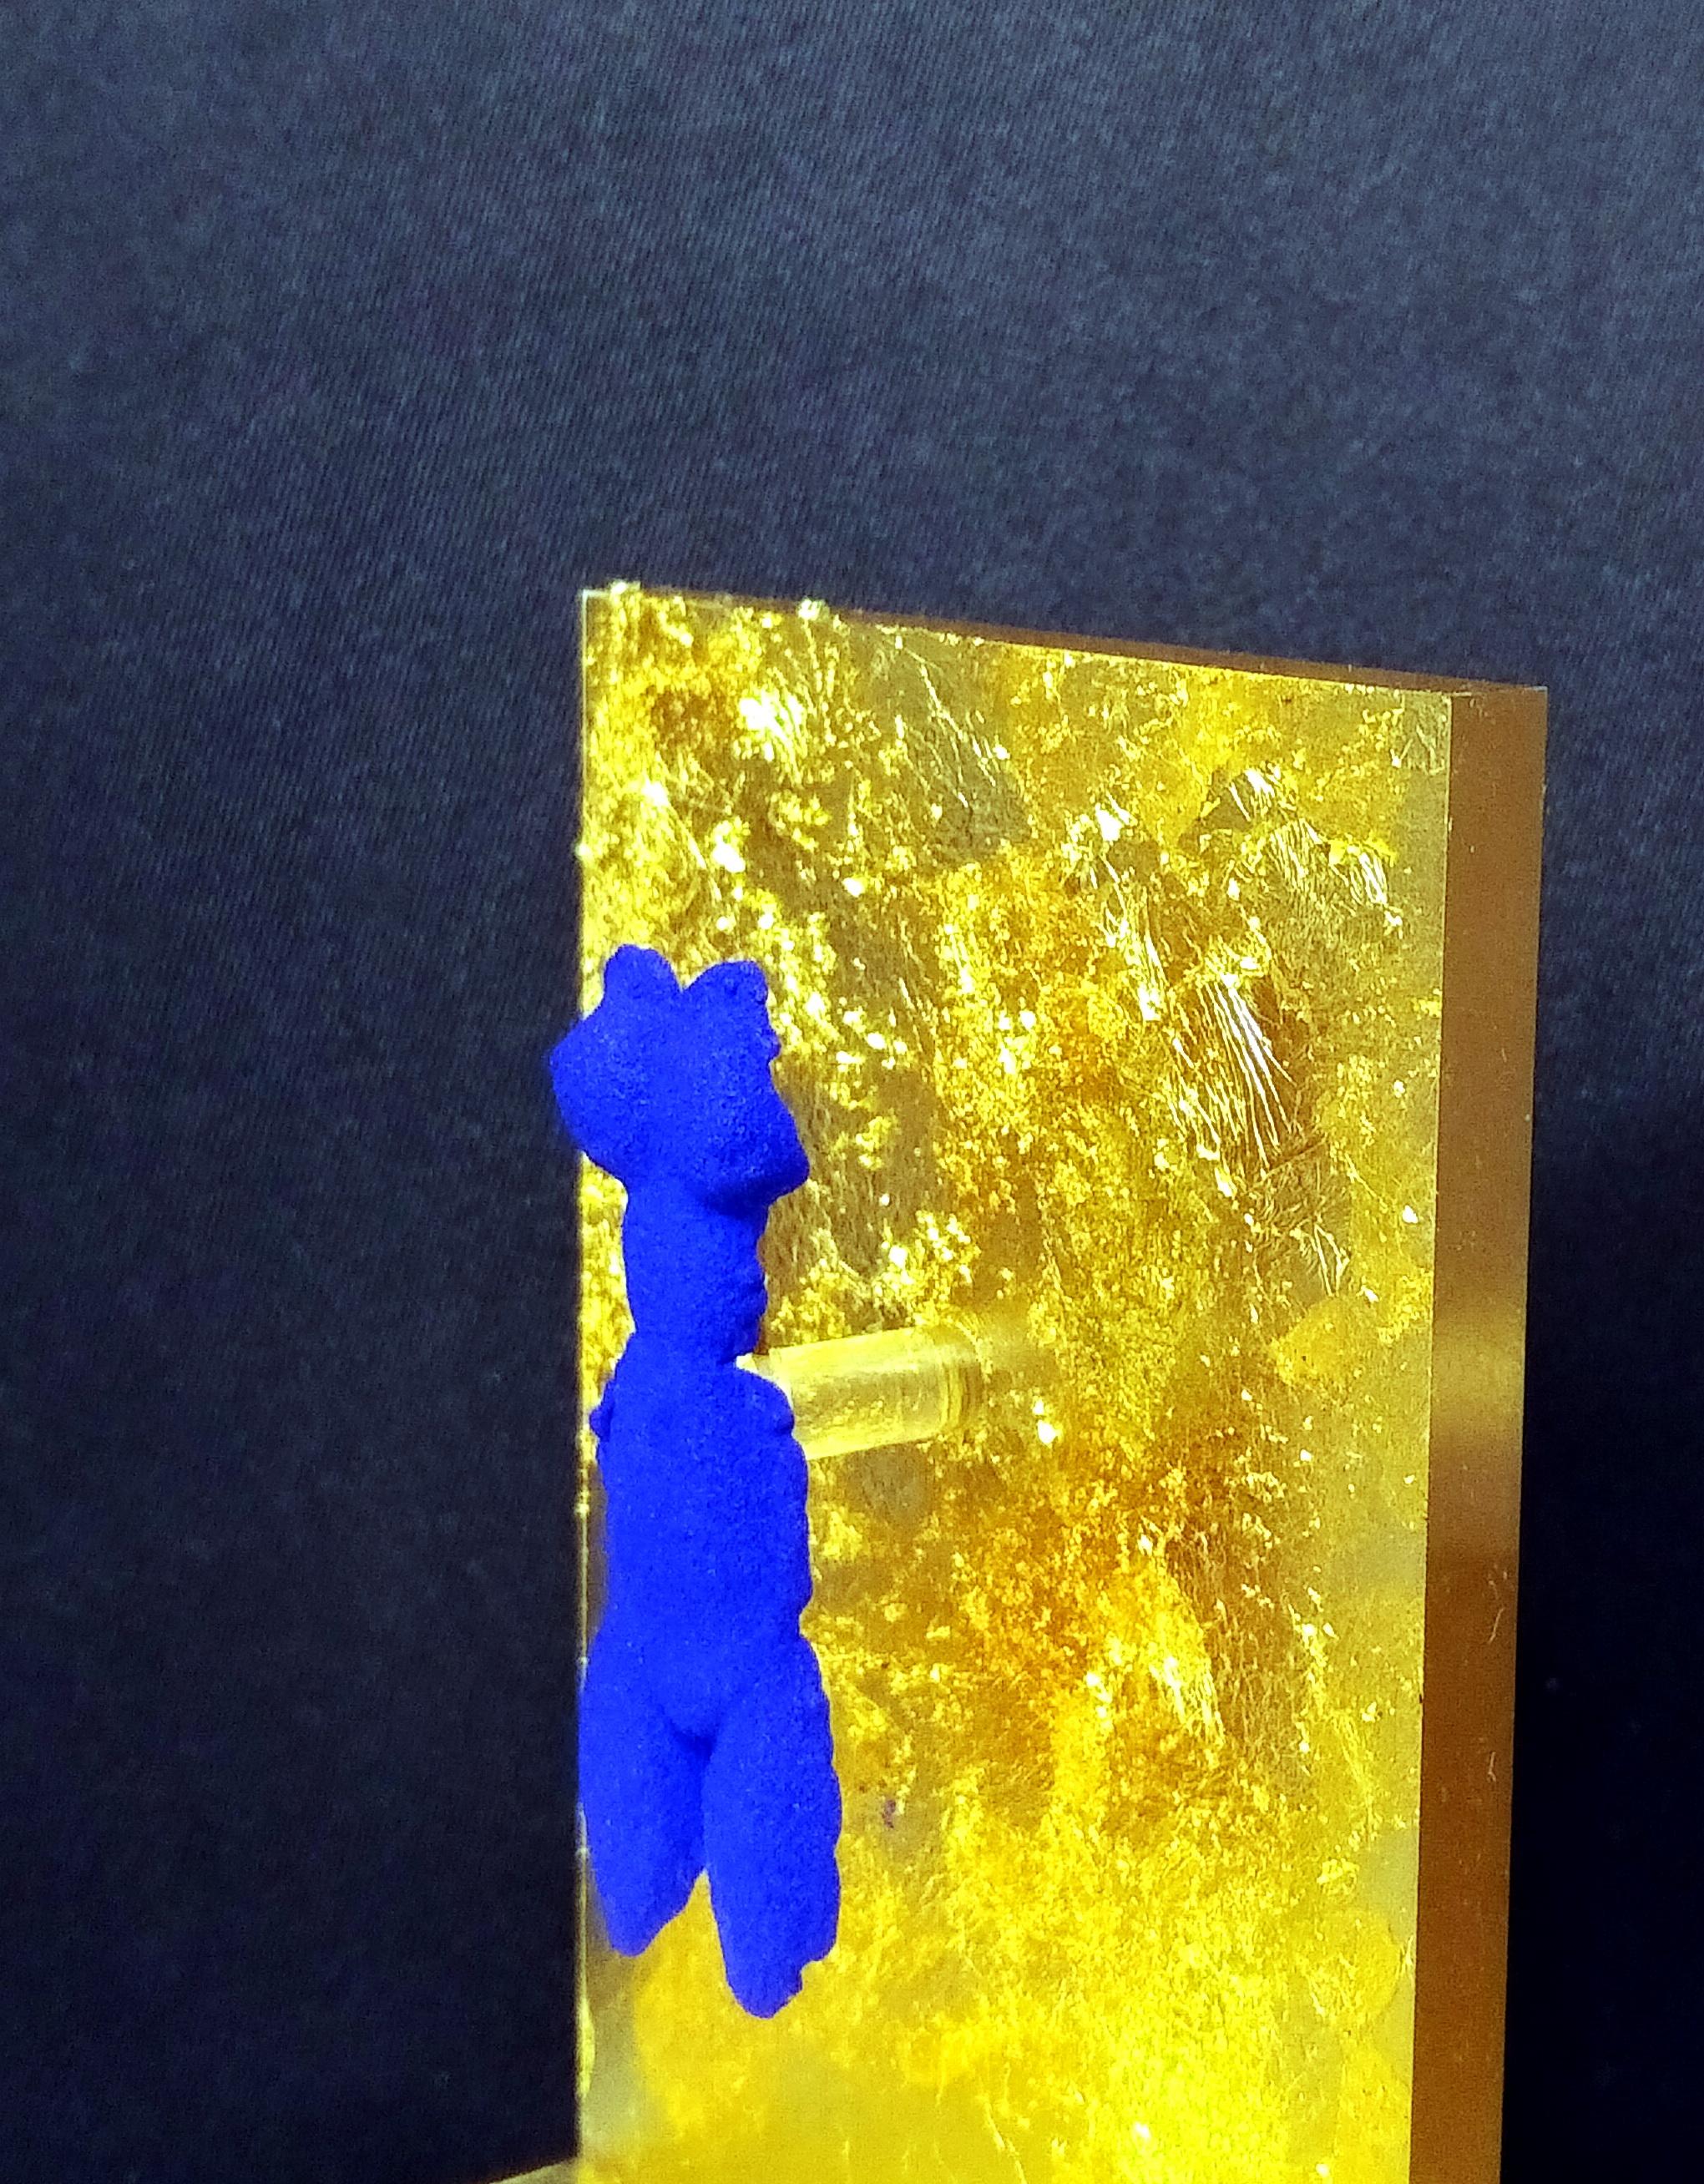 Yves Klein, Small IKB Venus Brooch
Bronze multiple, painted with International Klein Blue (IKB).
From a model created in 1956.
Edition of 500 copies + 100 artist’s proofs. This copy numbered 121/175.
Height: 6 centimeters but 12 centimeters is the